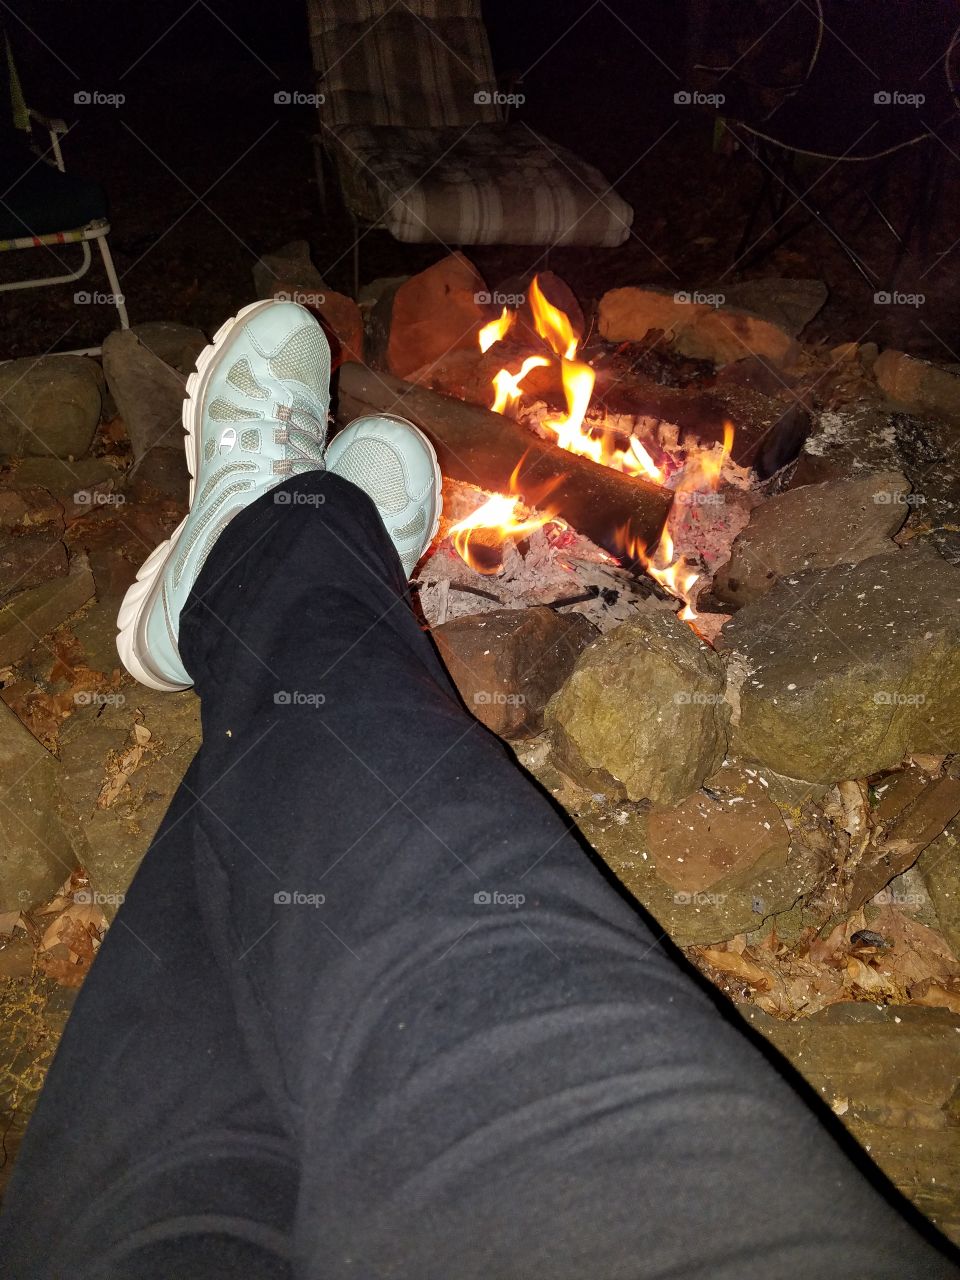 warming up by the fire